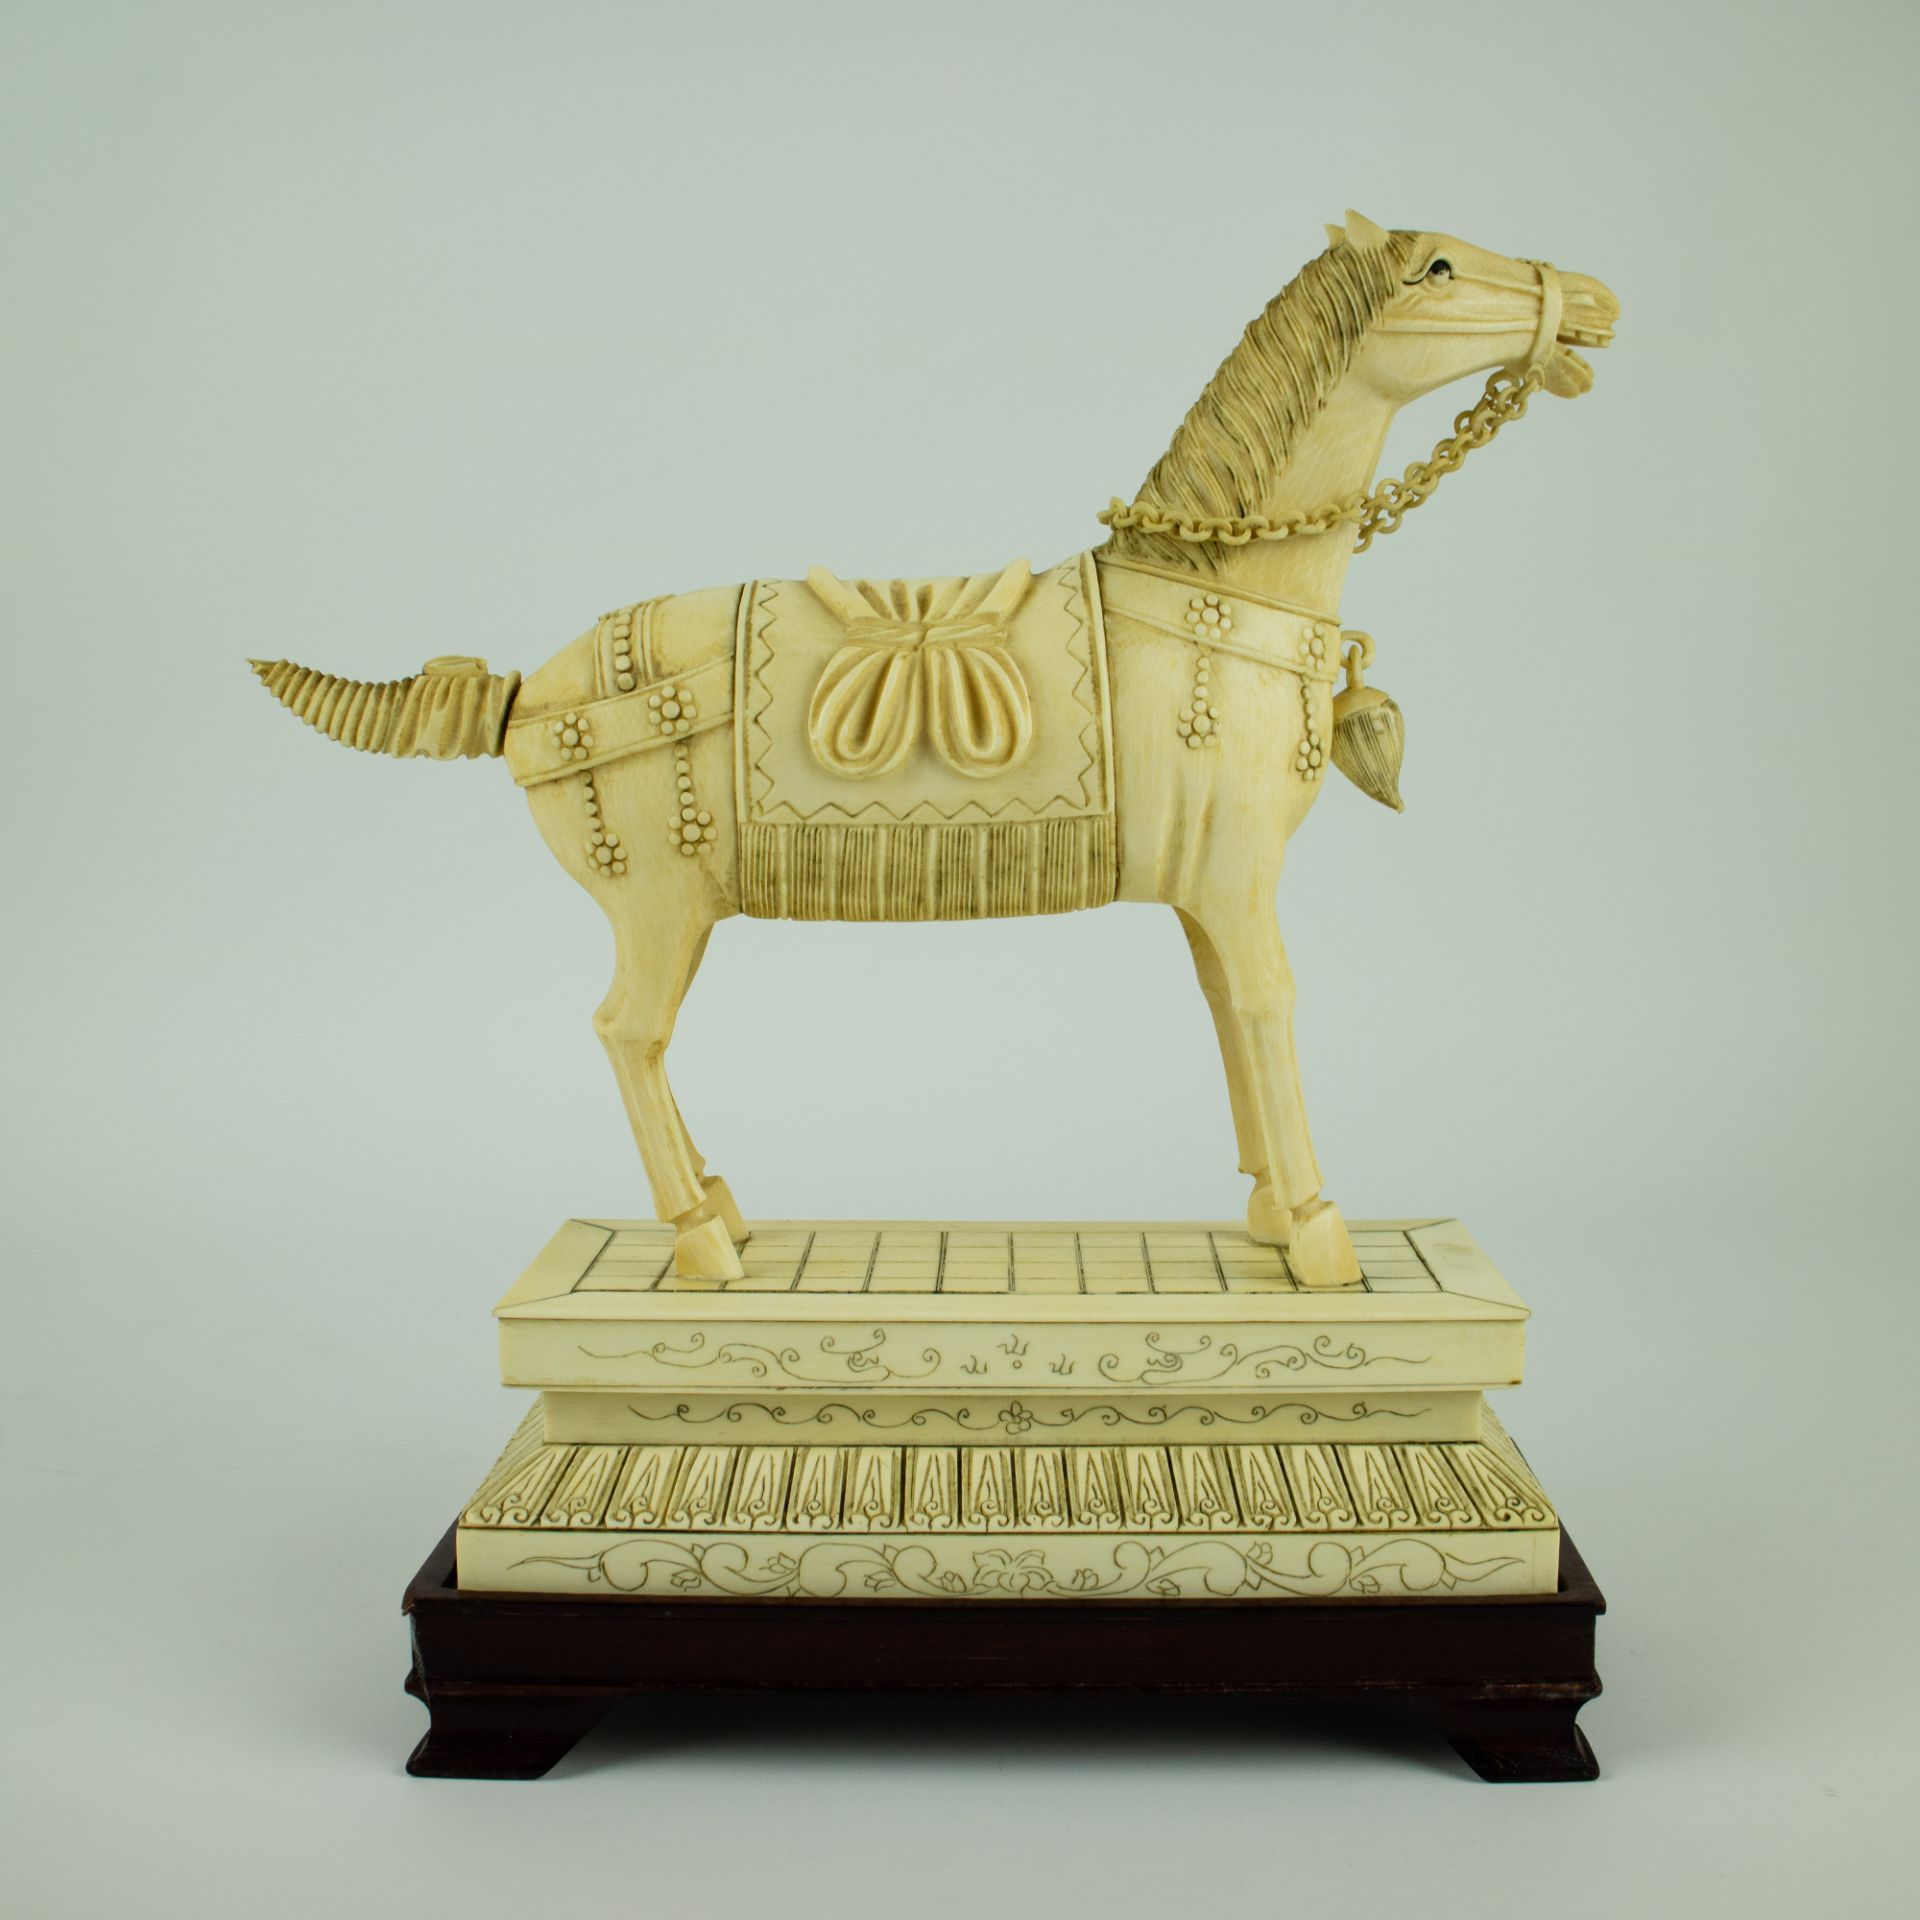 2 Chinese horses very finely carved in ivory - Image 7 of 13